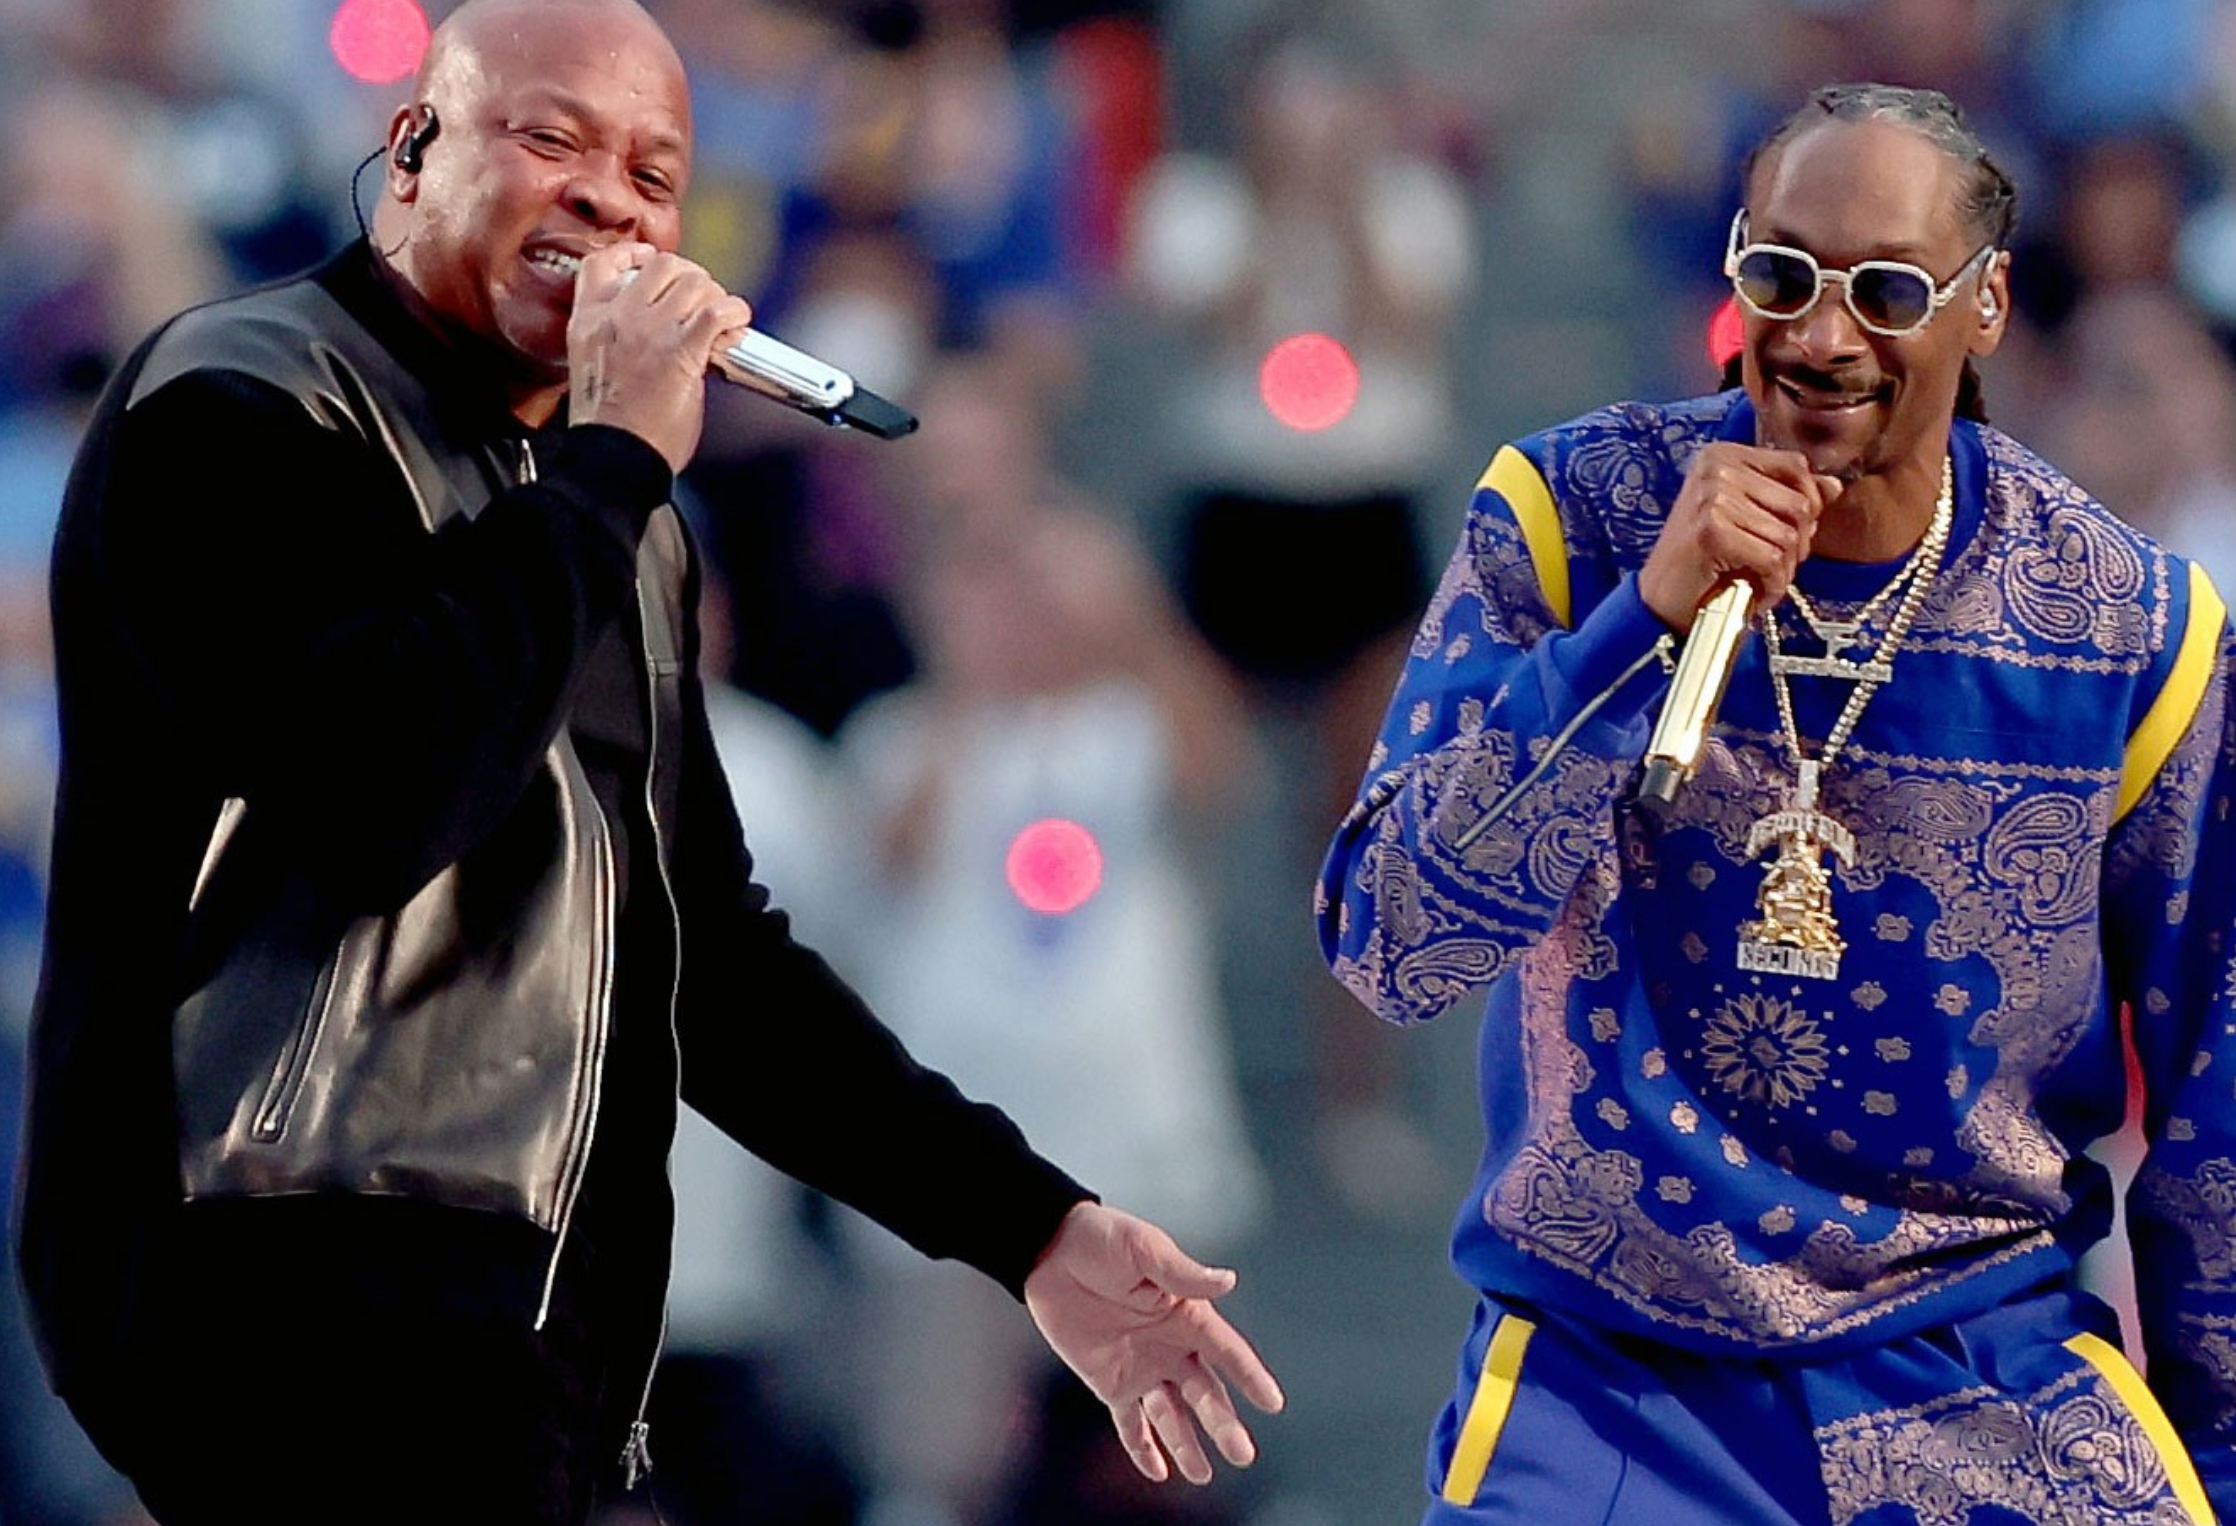 Snoop Dogg Announces New Album 'Missionary' Produced by Dr. Dre